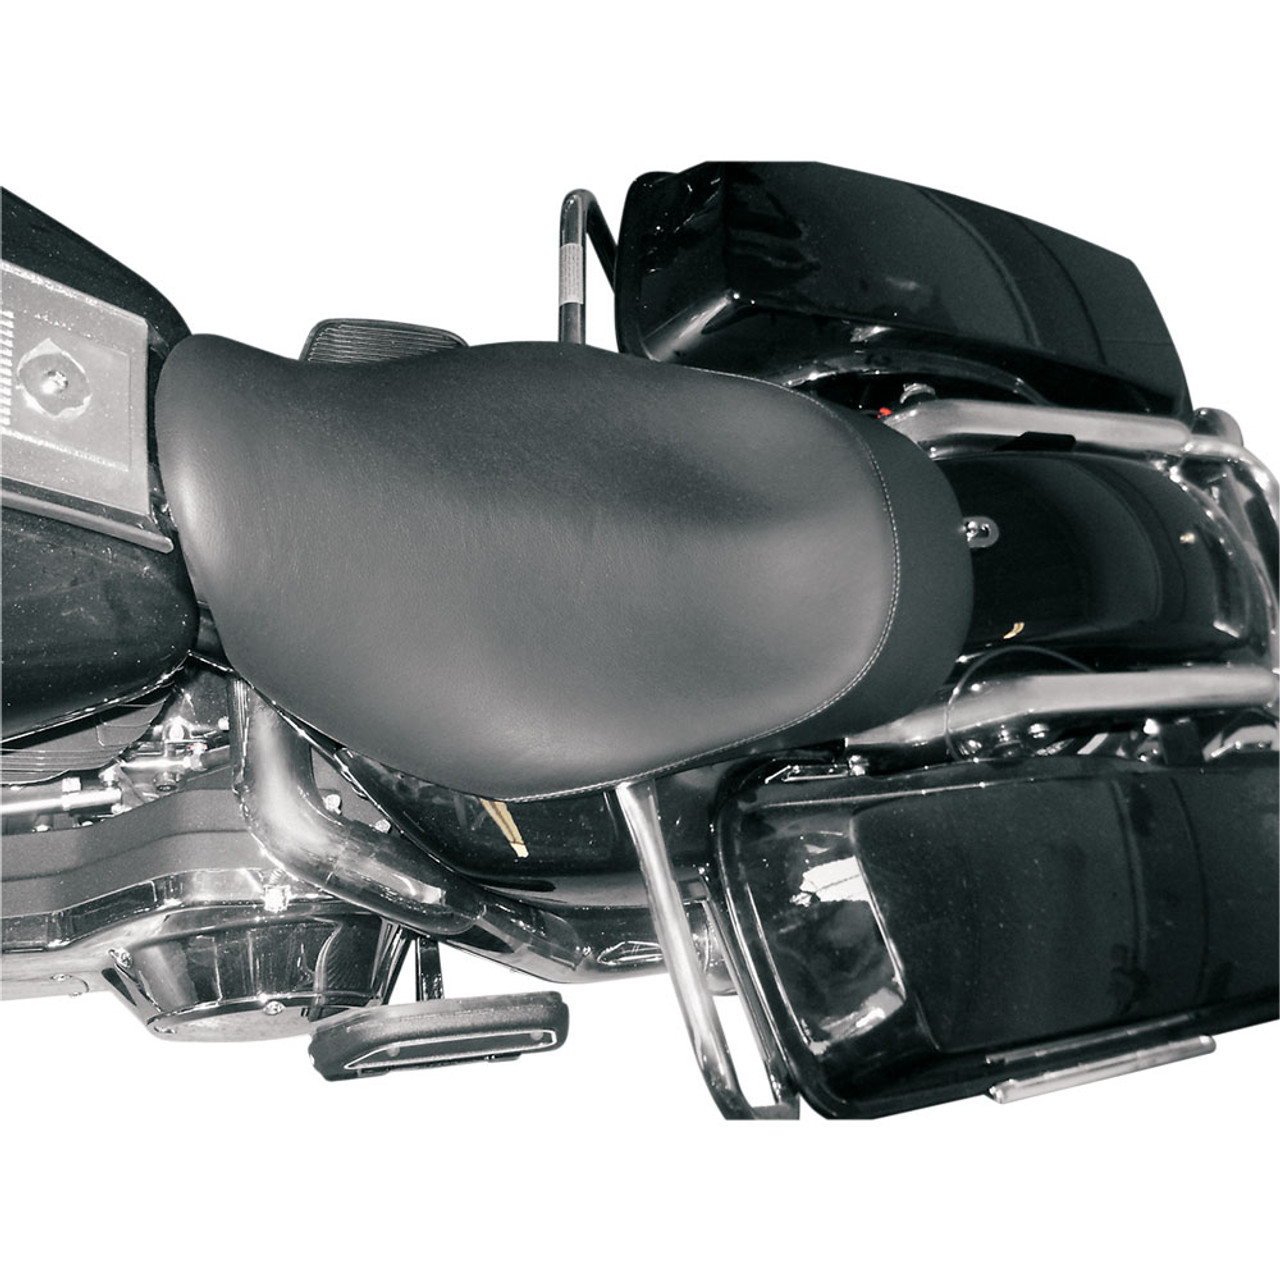 2007 road king accessories